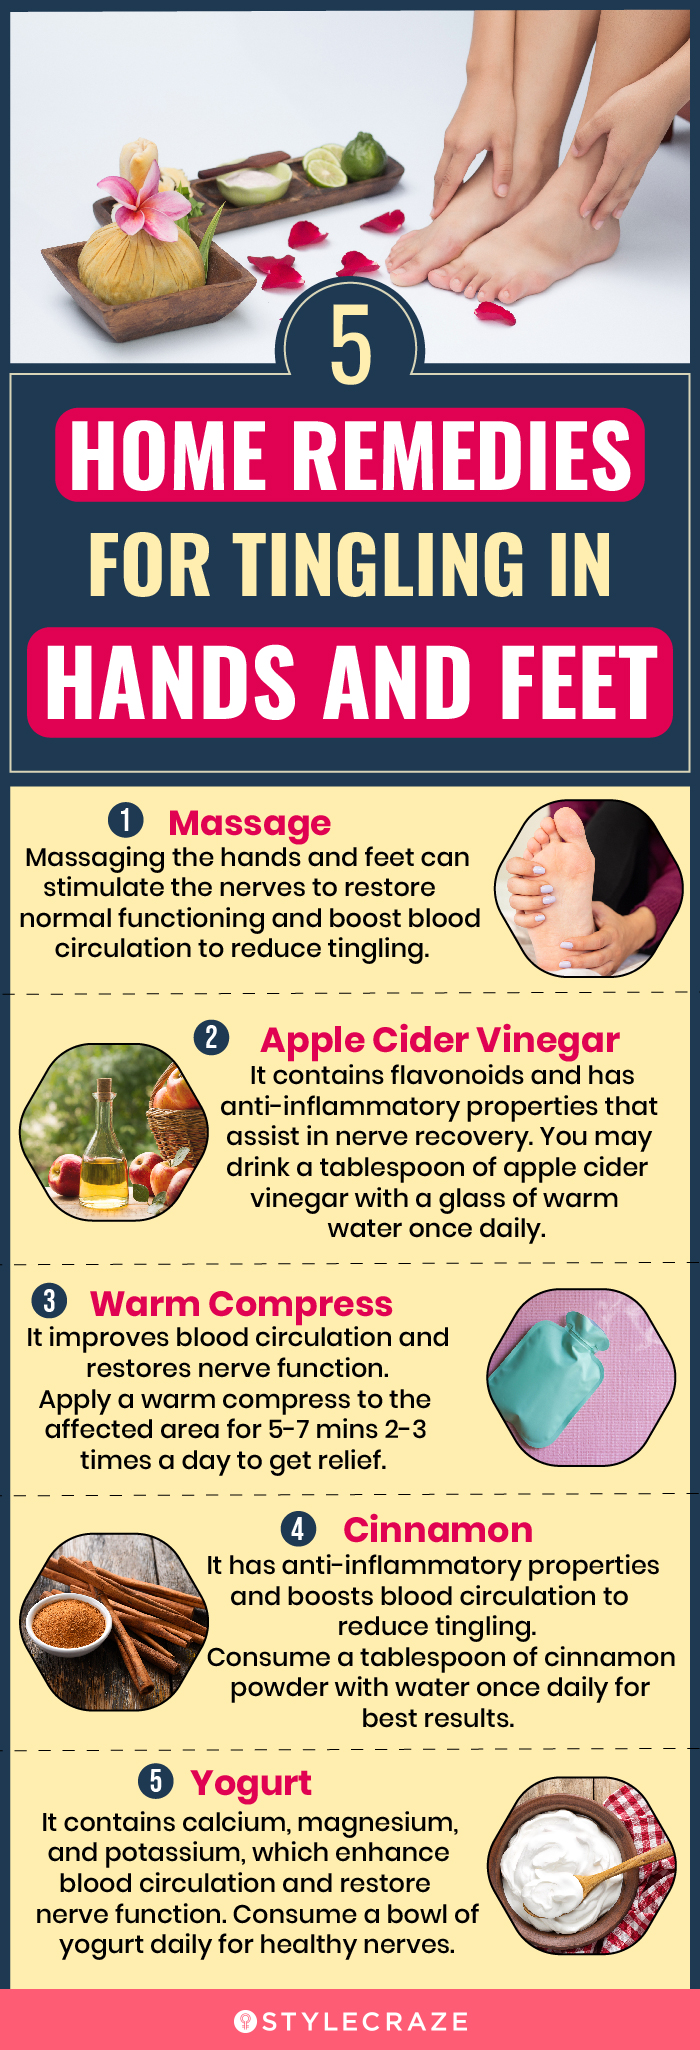 home remedies for tingling in hand and feet [infographic]